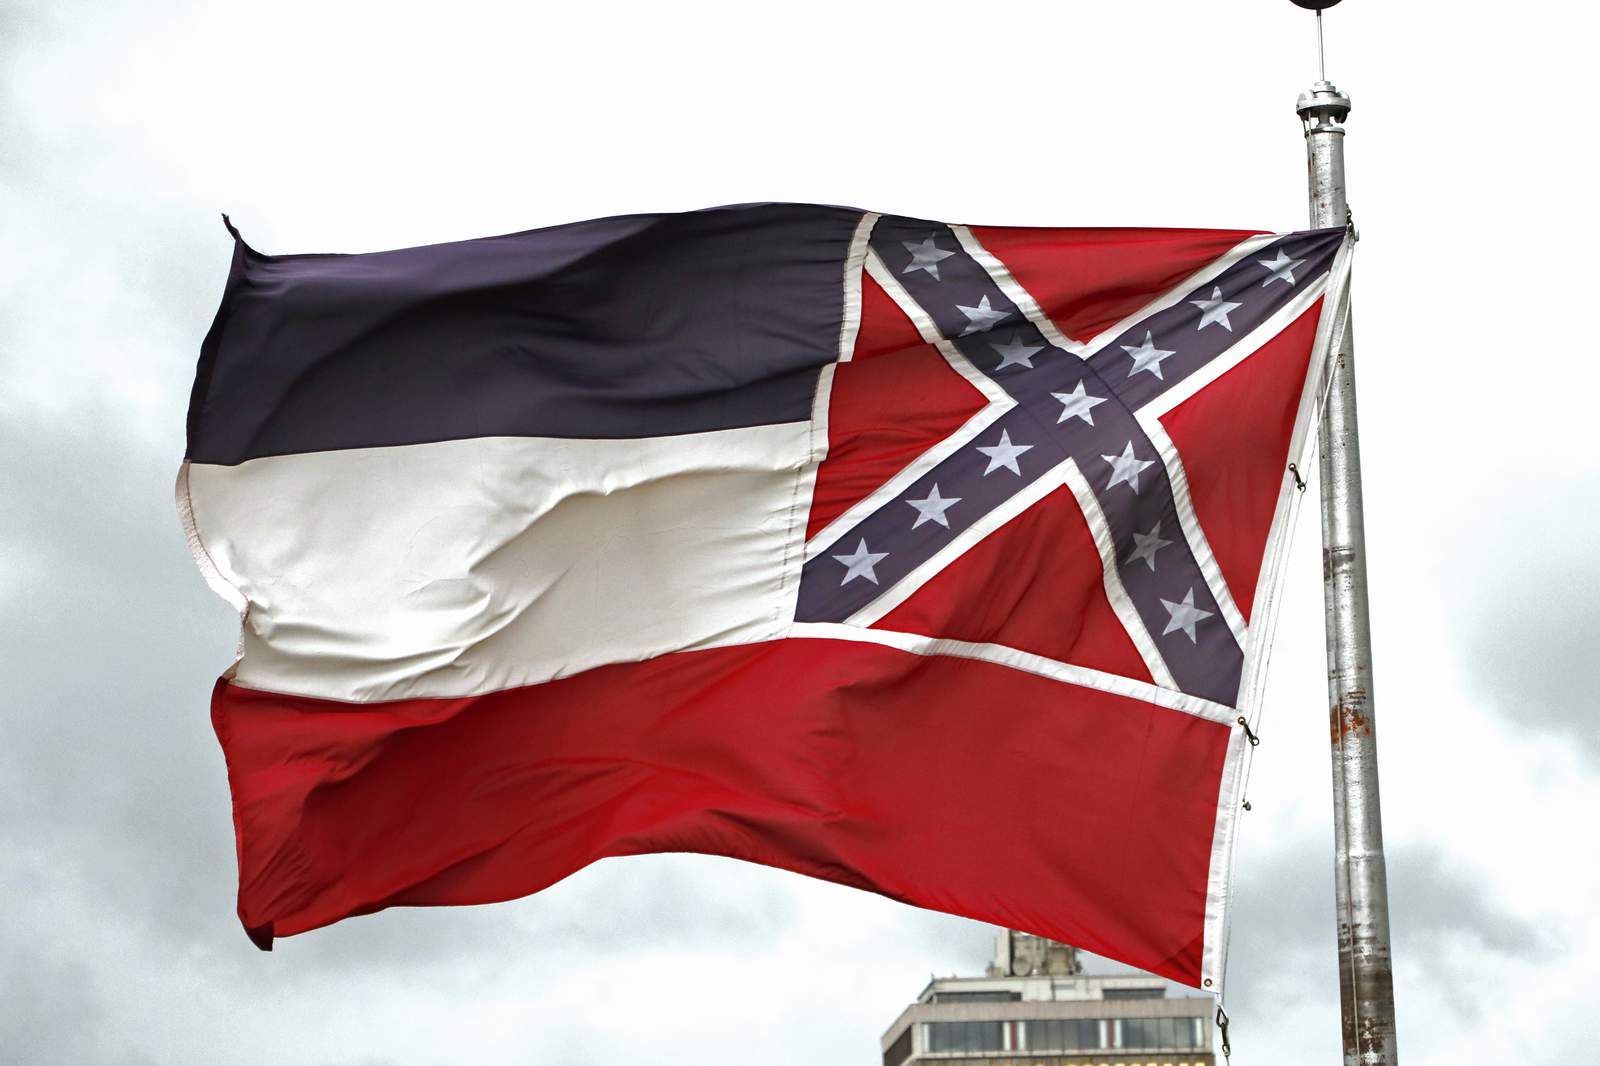 Mississippi could strip Confederate symbol from state flag